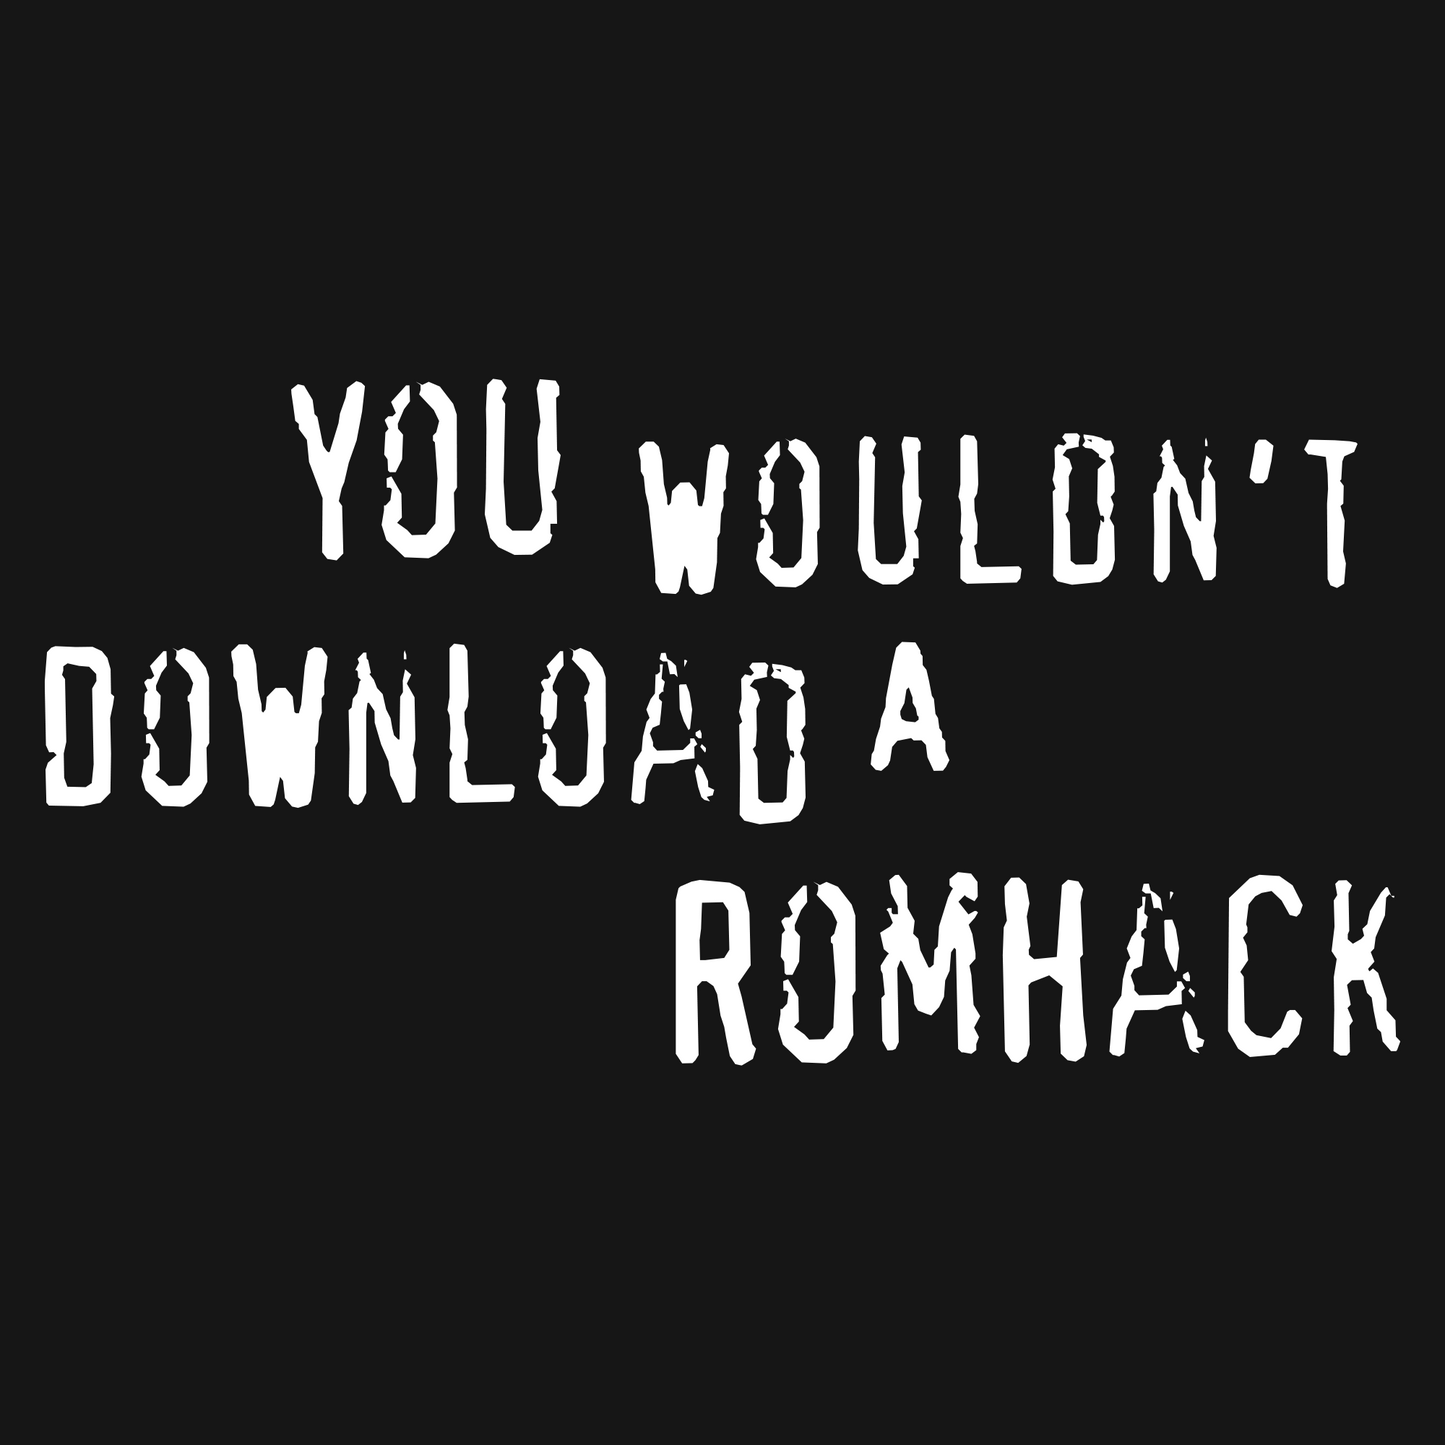 You Wouldn't Download a Romhack T-Shirt